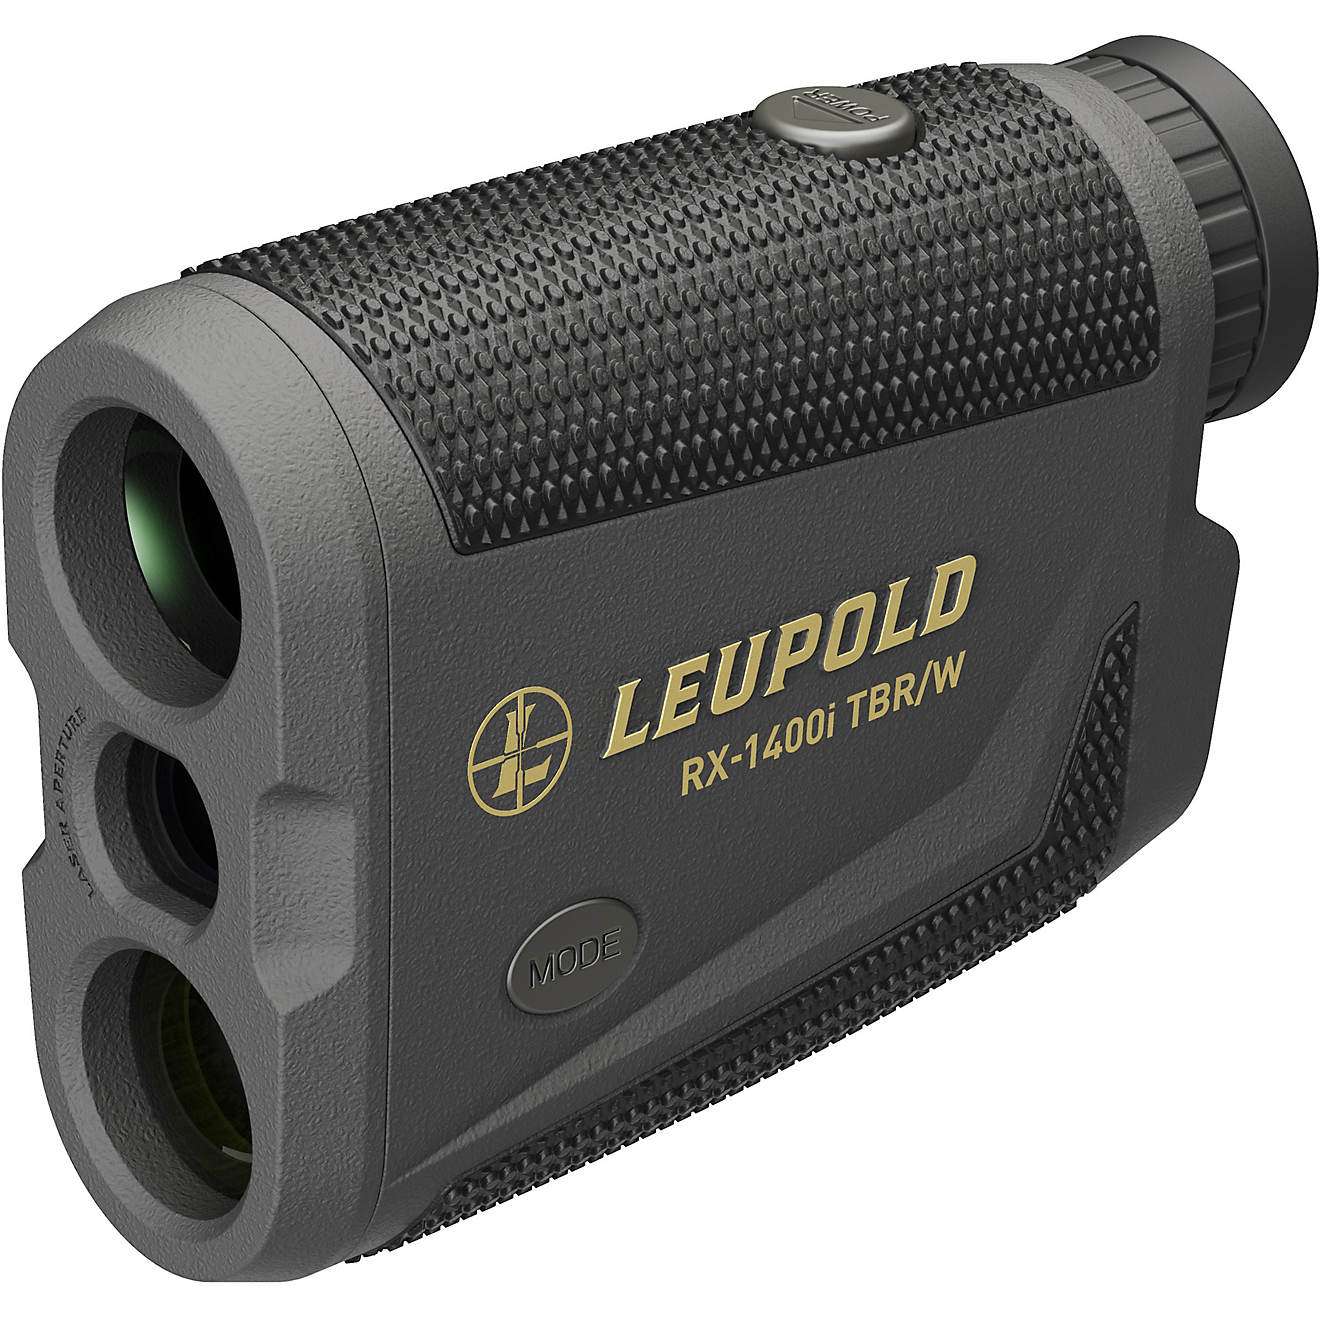 <p><strong>Leupold RX-1400i TBR/W Laser 21 mm Rangefinder with DNA Red Reticle</strong><br> Don't miss the shot of a lifetime due to miscalculated distance. Having a reliable rangefinder is a must for a hunter, and especially a bowhunter. Leupold's RX-1400i TBR/W Laser 21 mm Rangefinder with DNA Red Reticle is going to have you on the money and prepared for your next big moment. <a href=